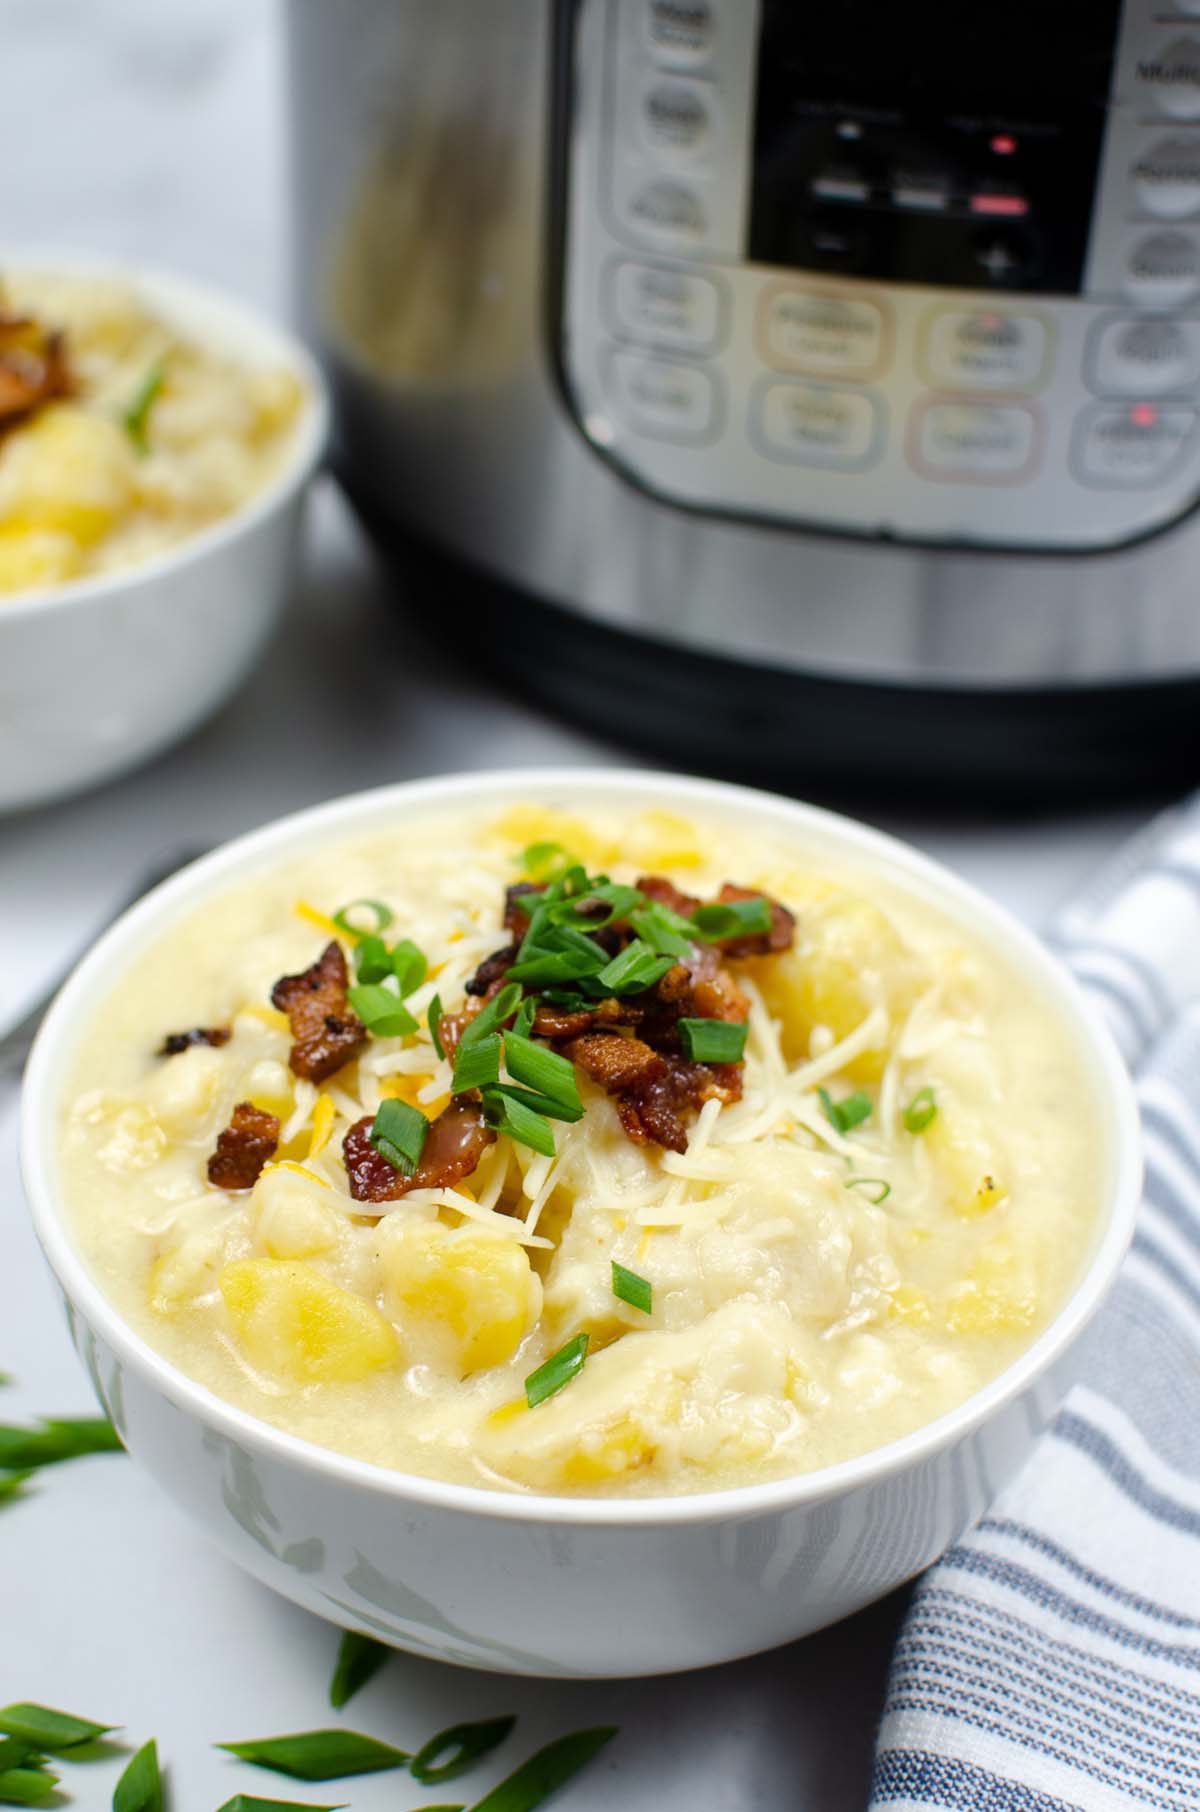 A bowl of potato soup in front of the Instant Pot.